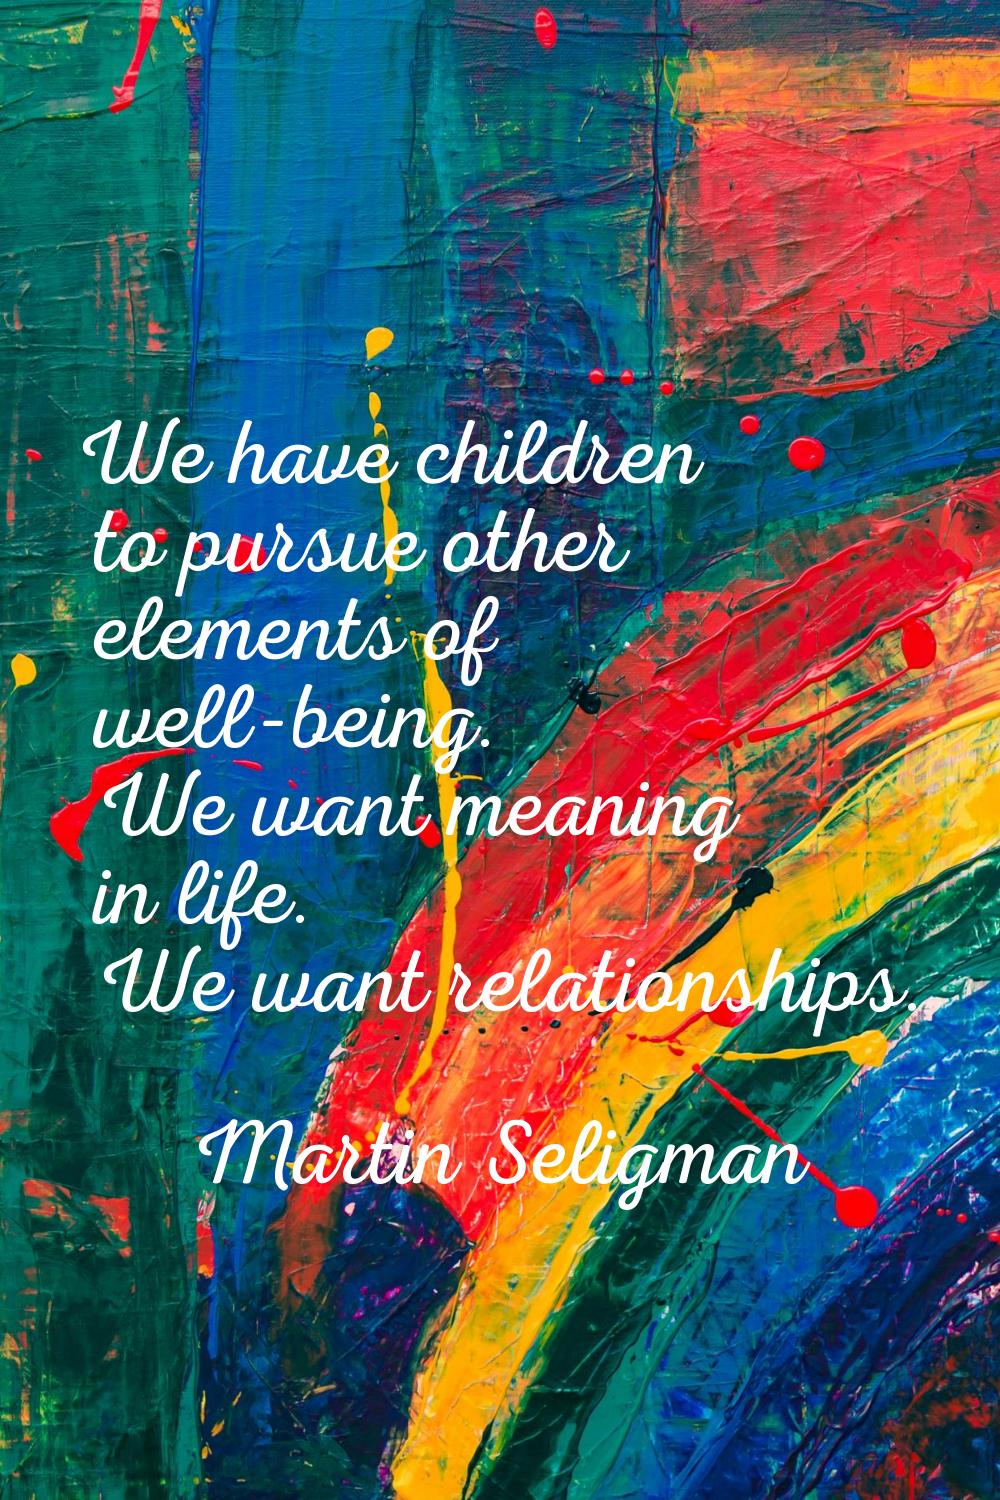 We have children to pursue other elements of well-being. We want meaning in life. We want relations